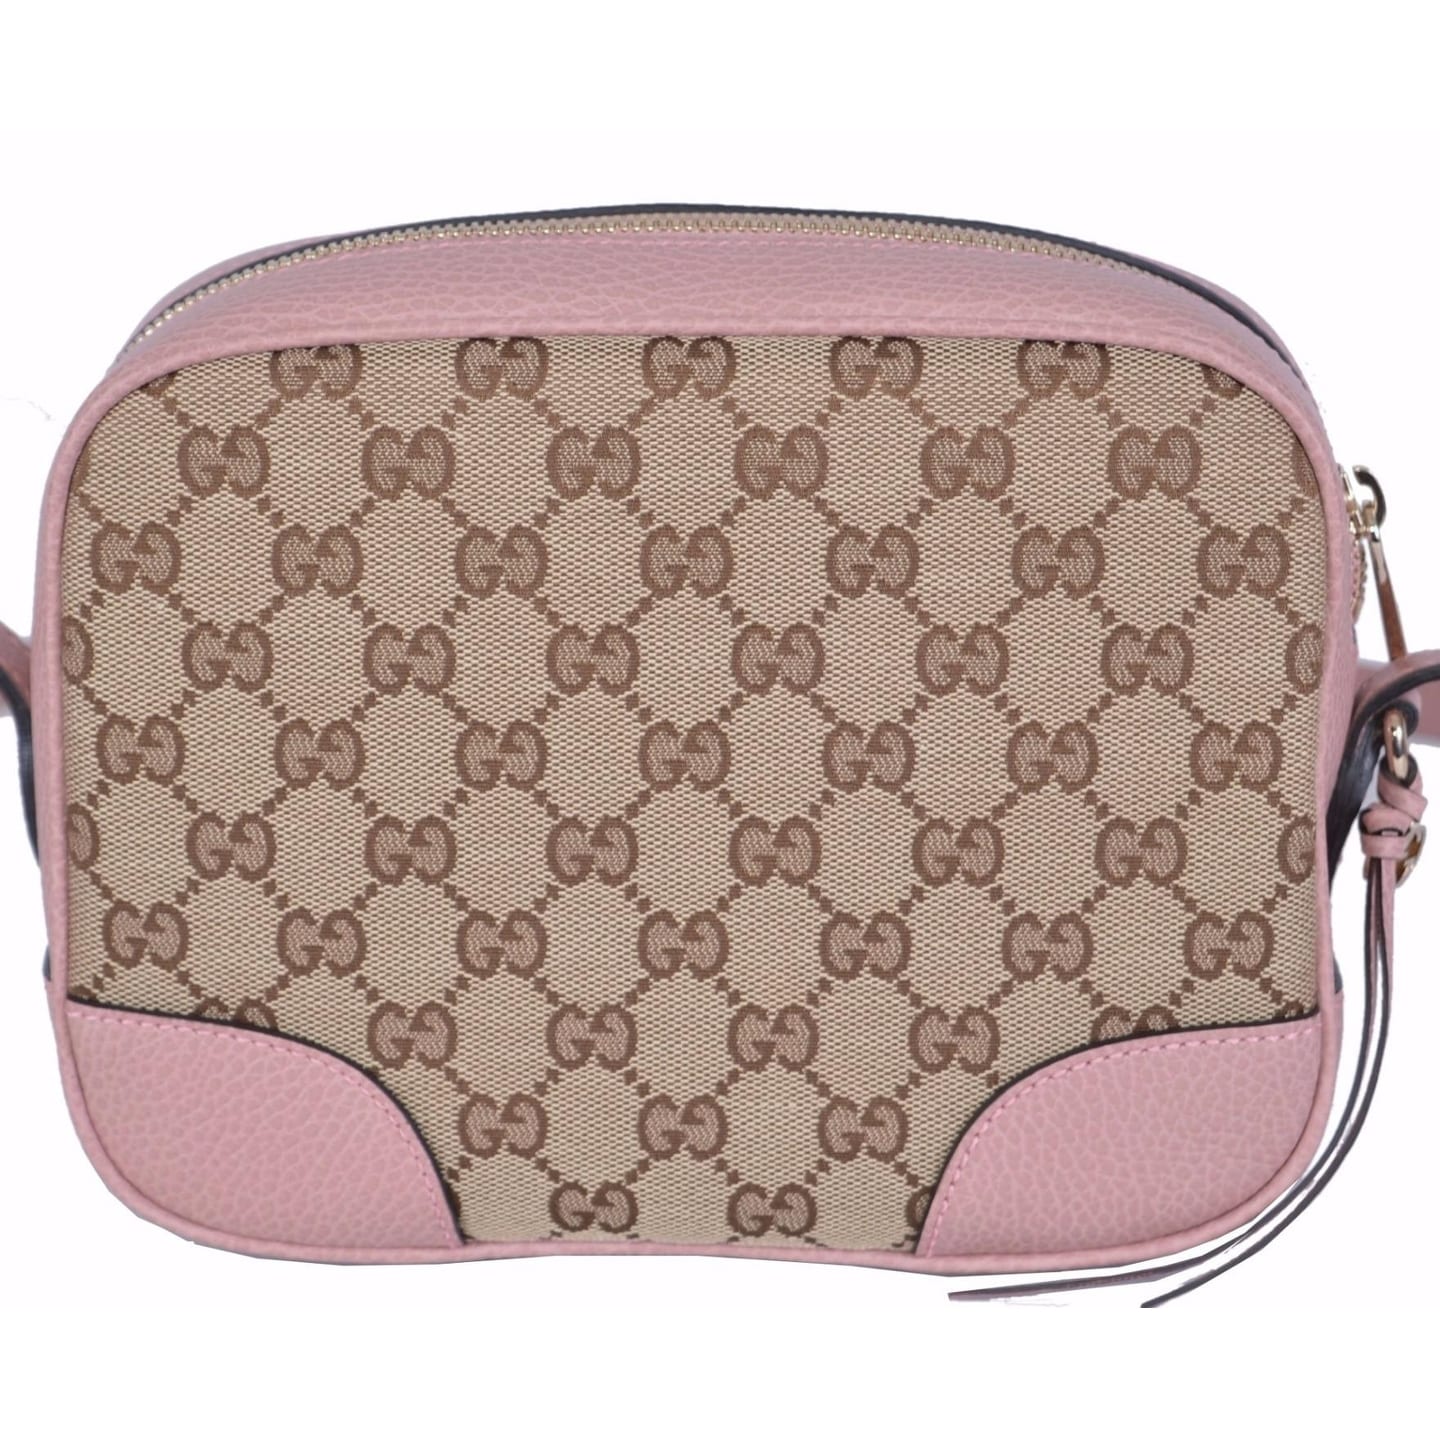 overstock gucci bags